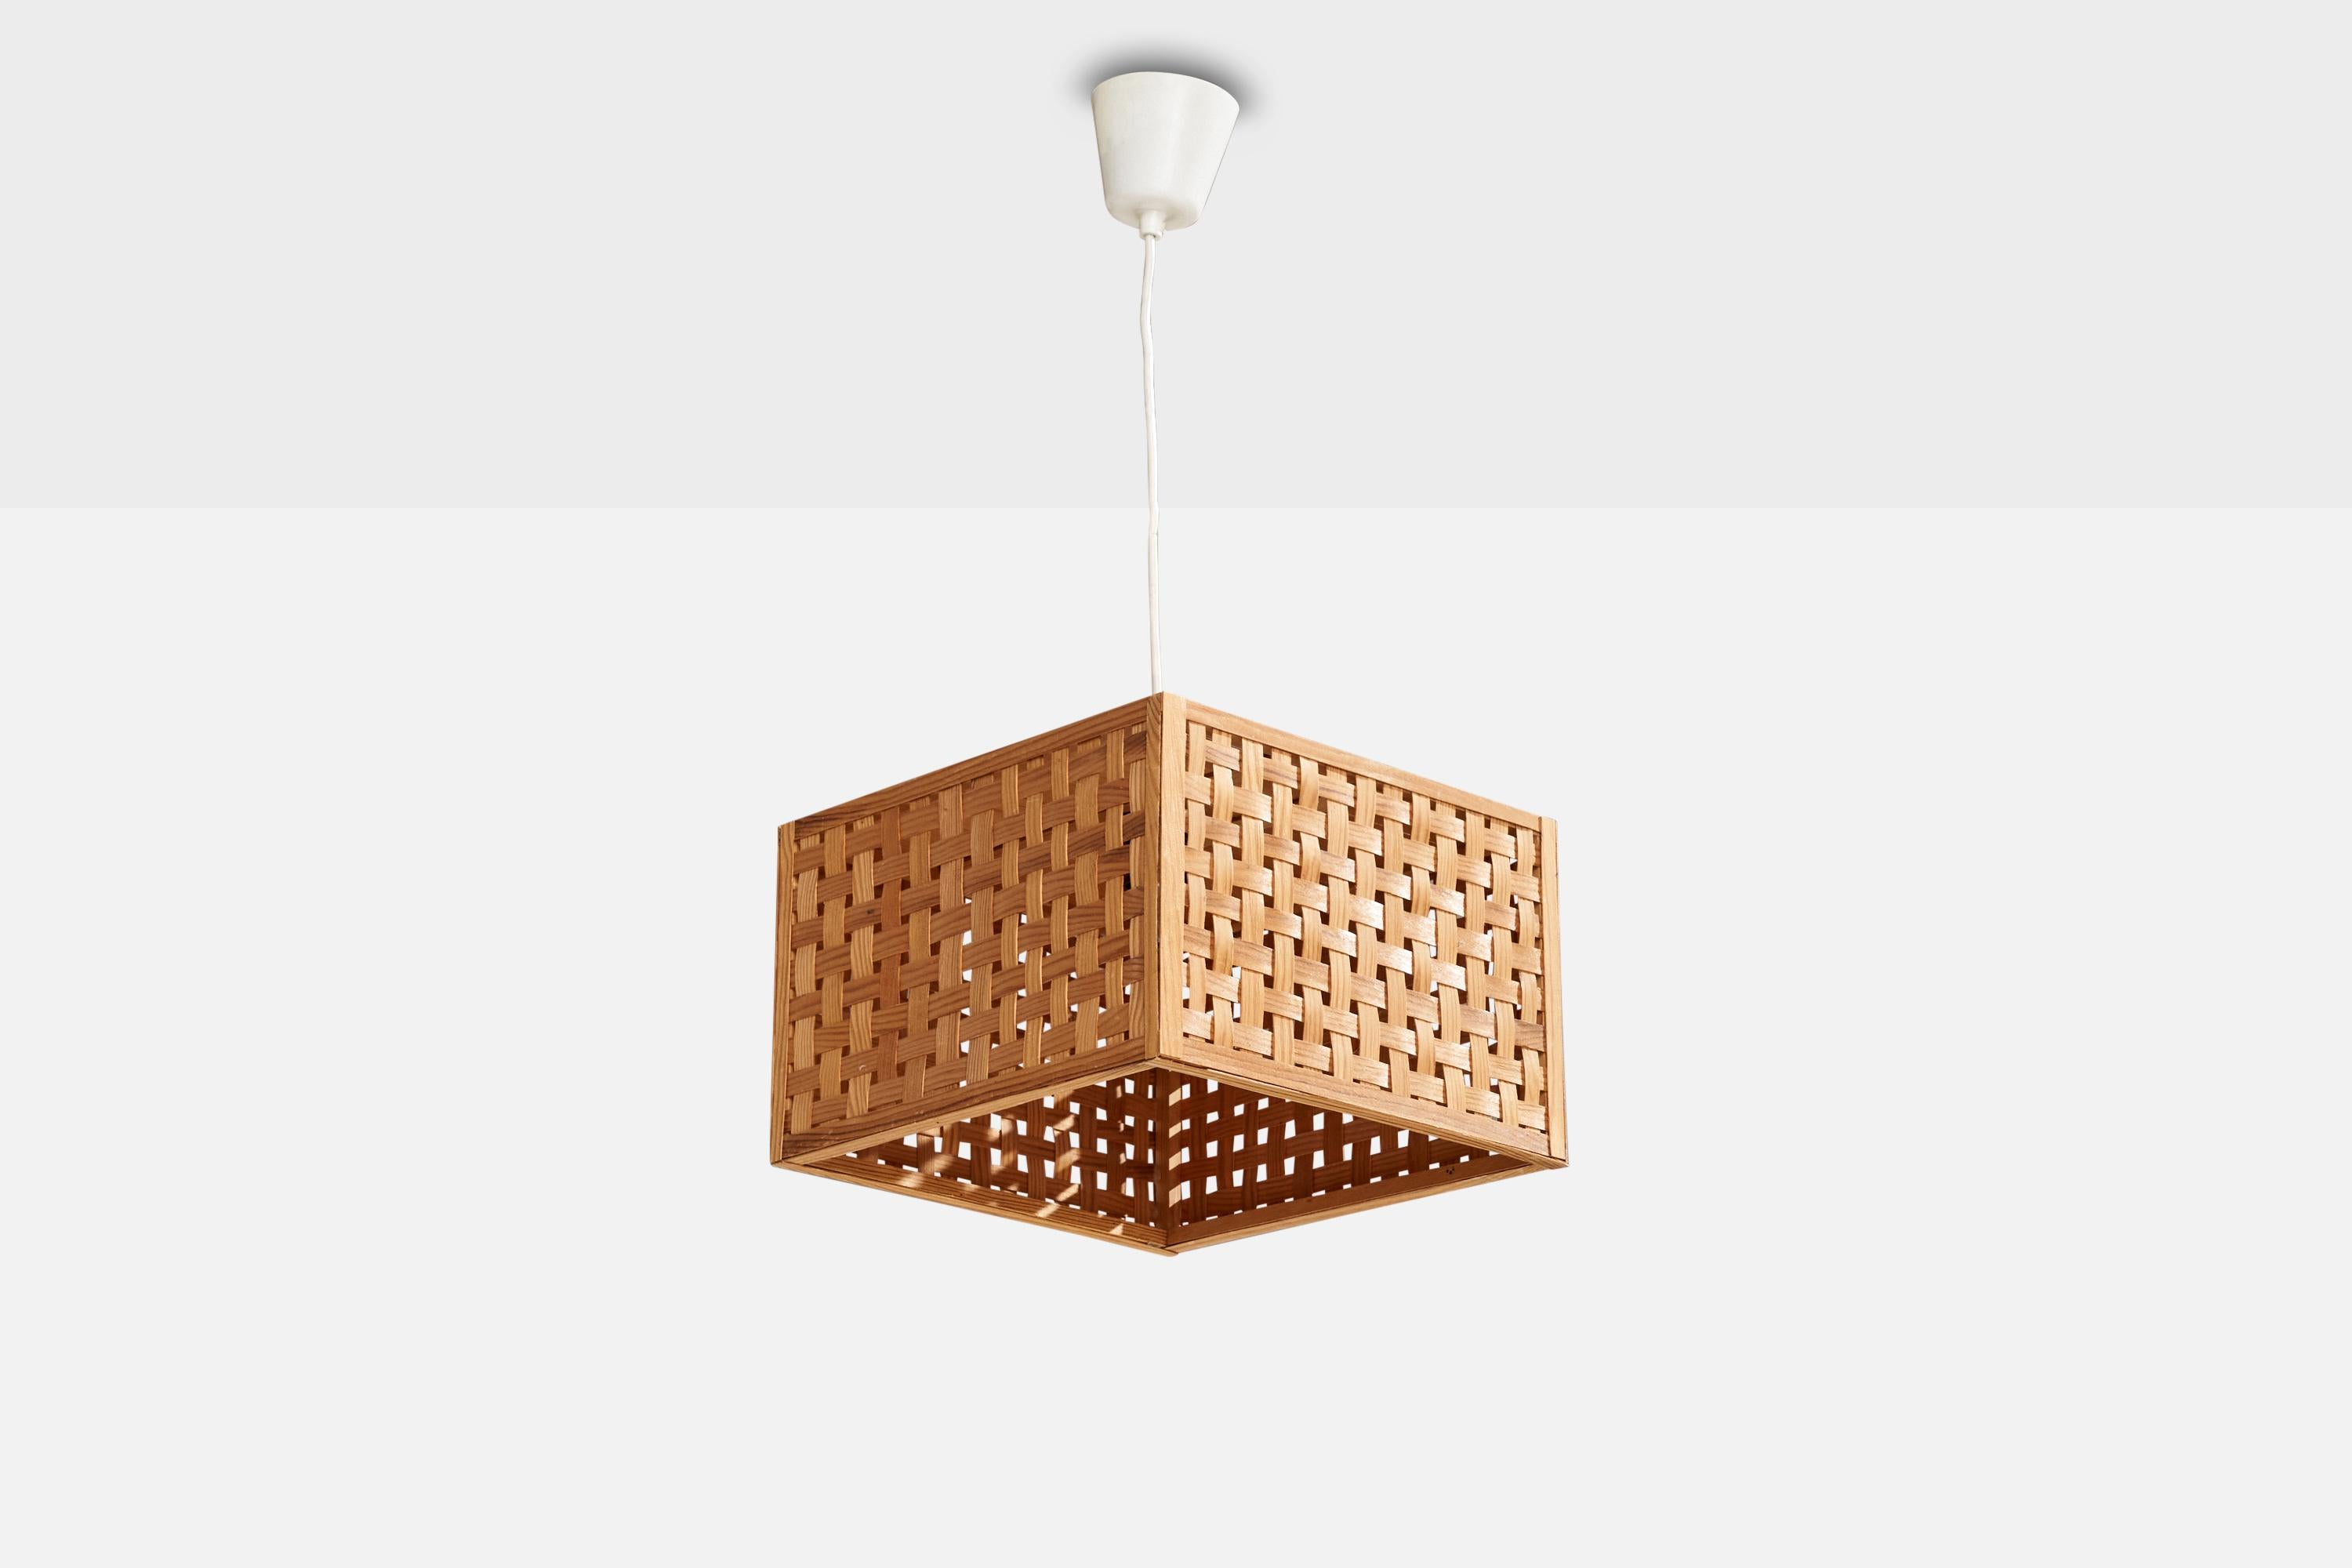 A pine and pine veneer pendant light designed and produced in Sweden, c. 1970s.

Dimensions of canopy (inches): 3.34” H x 3.6” Diameter
Socket takes standard E-26 bulbs. 1 socket.There is no maximum wattage stated on the fixture. All lighting will